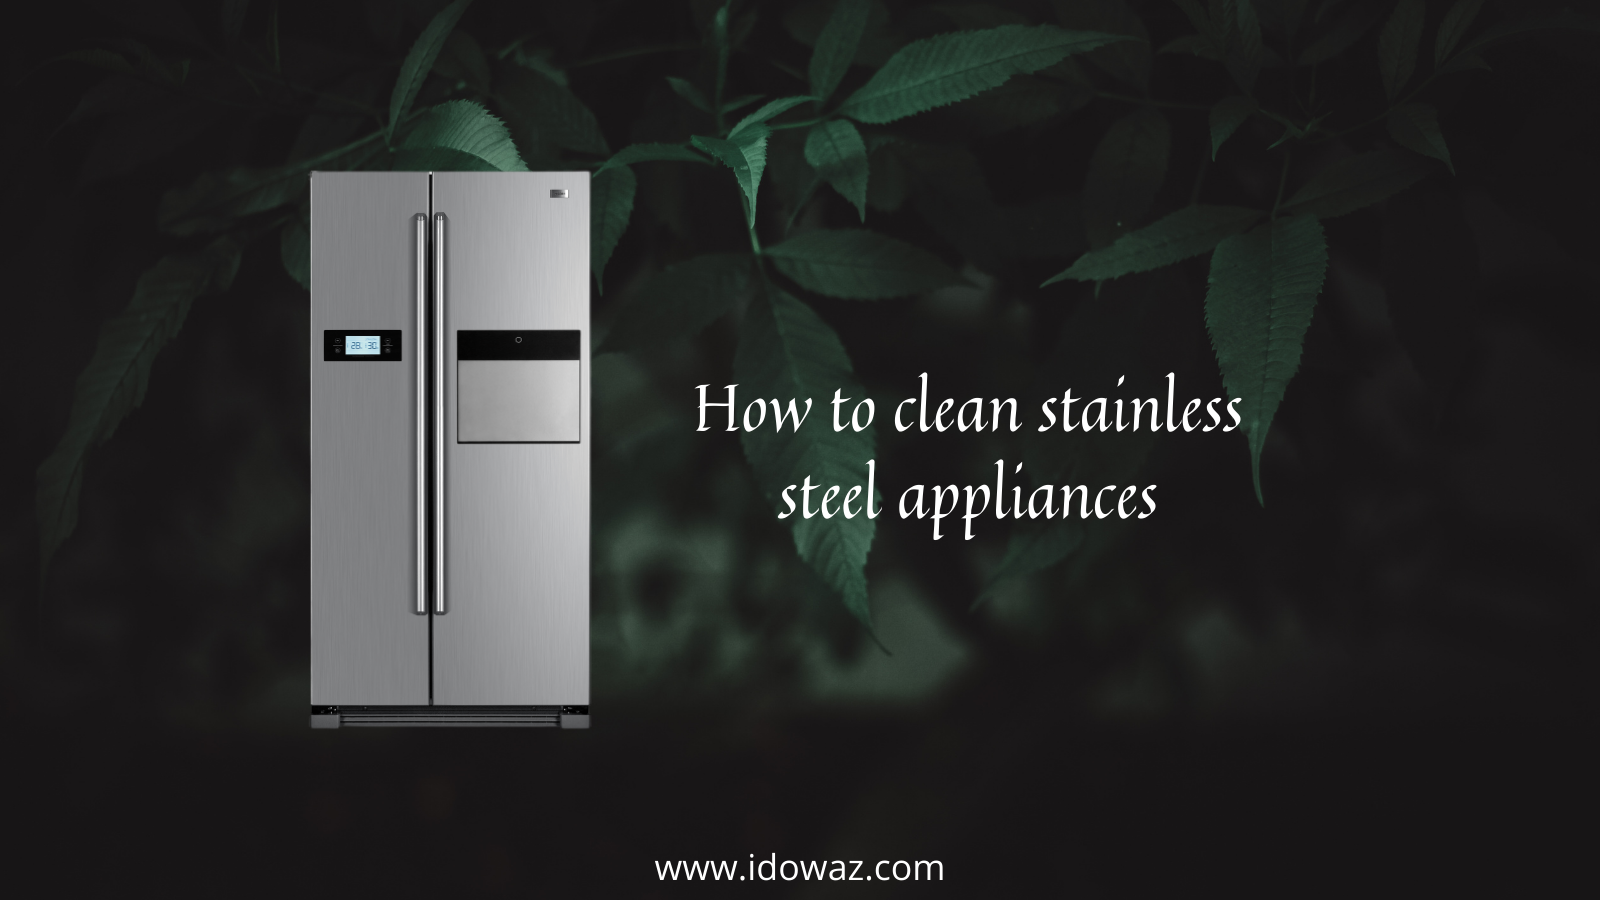 You are currently viewing How to clean stainless steel appliances.